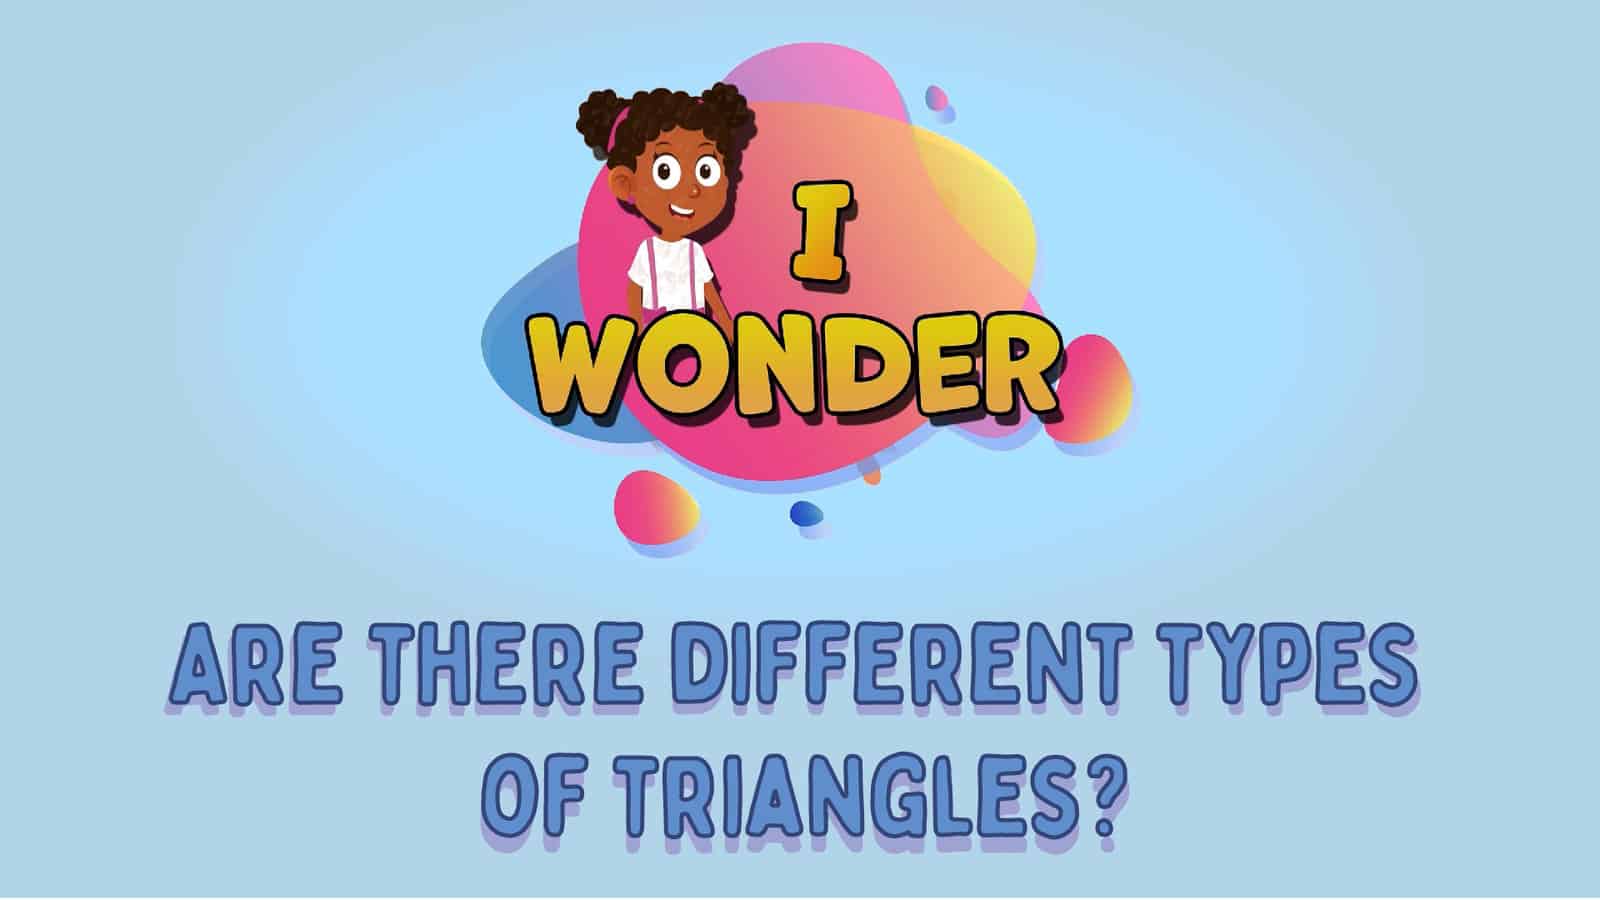 Are There Different Types Of Triangles?